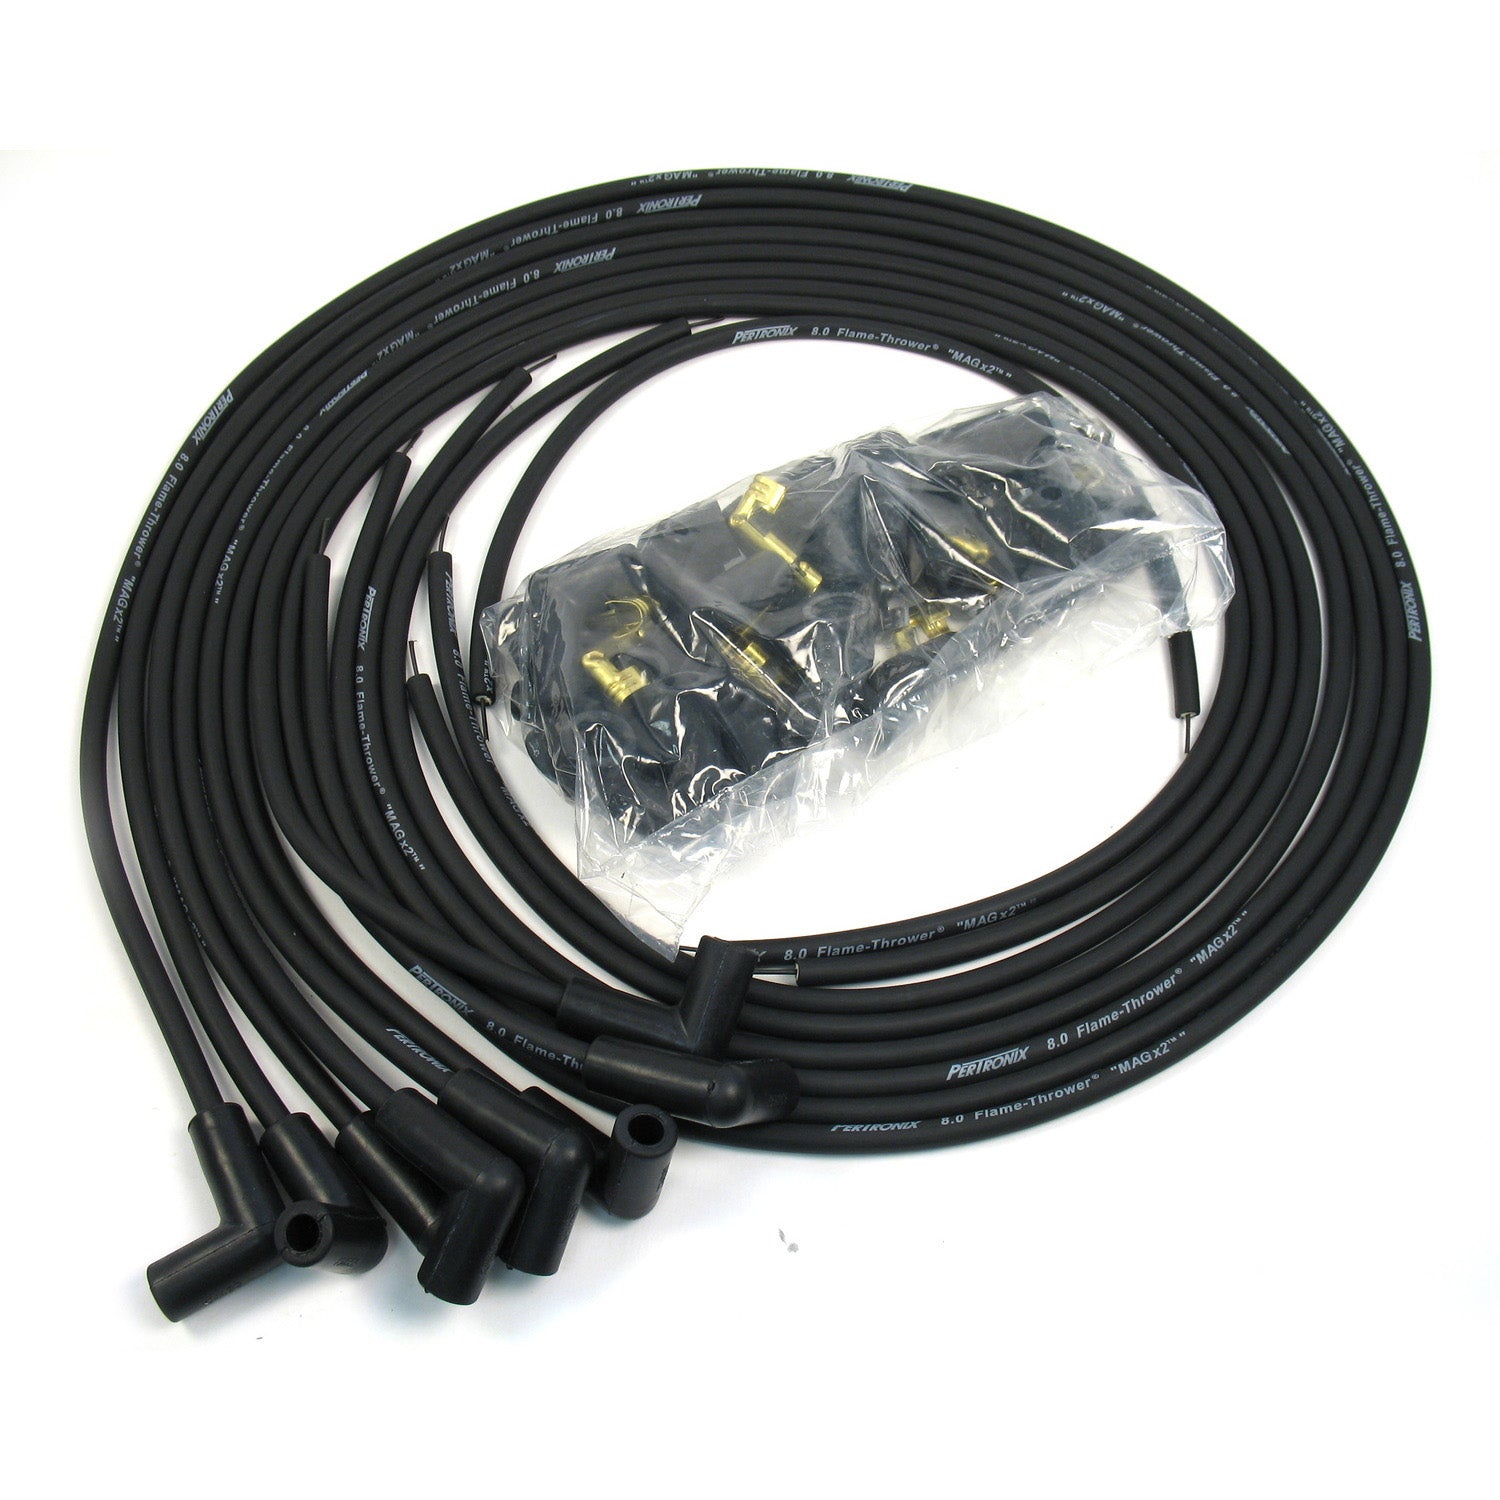 PerTronix 808290 Flame-Thrower Spark Plug Wires 8 cyl 8mm